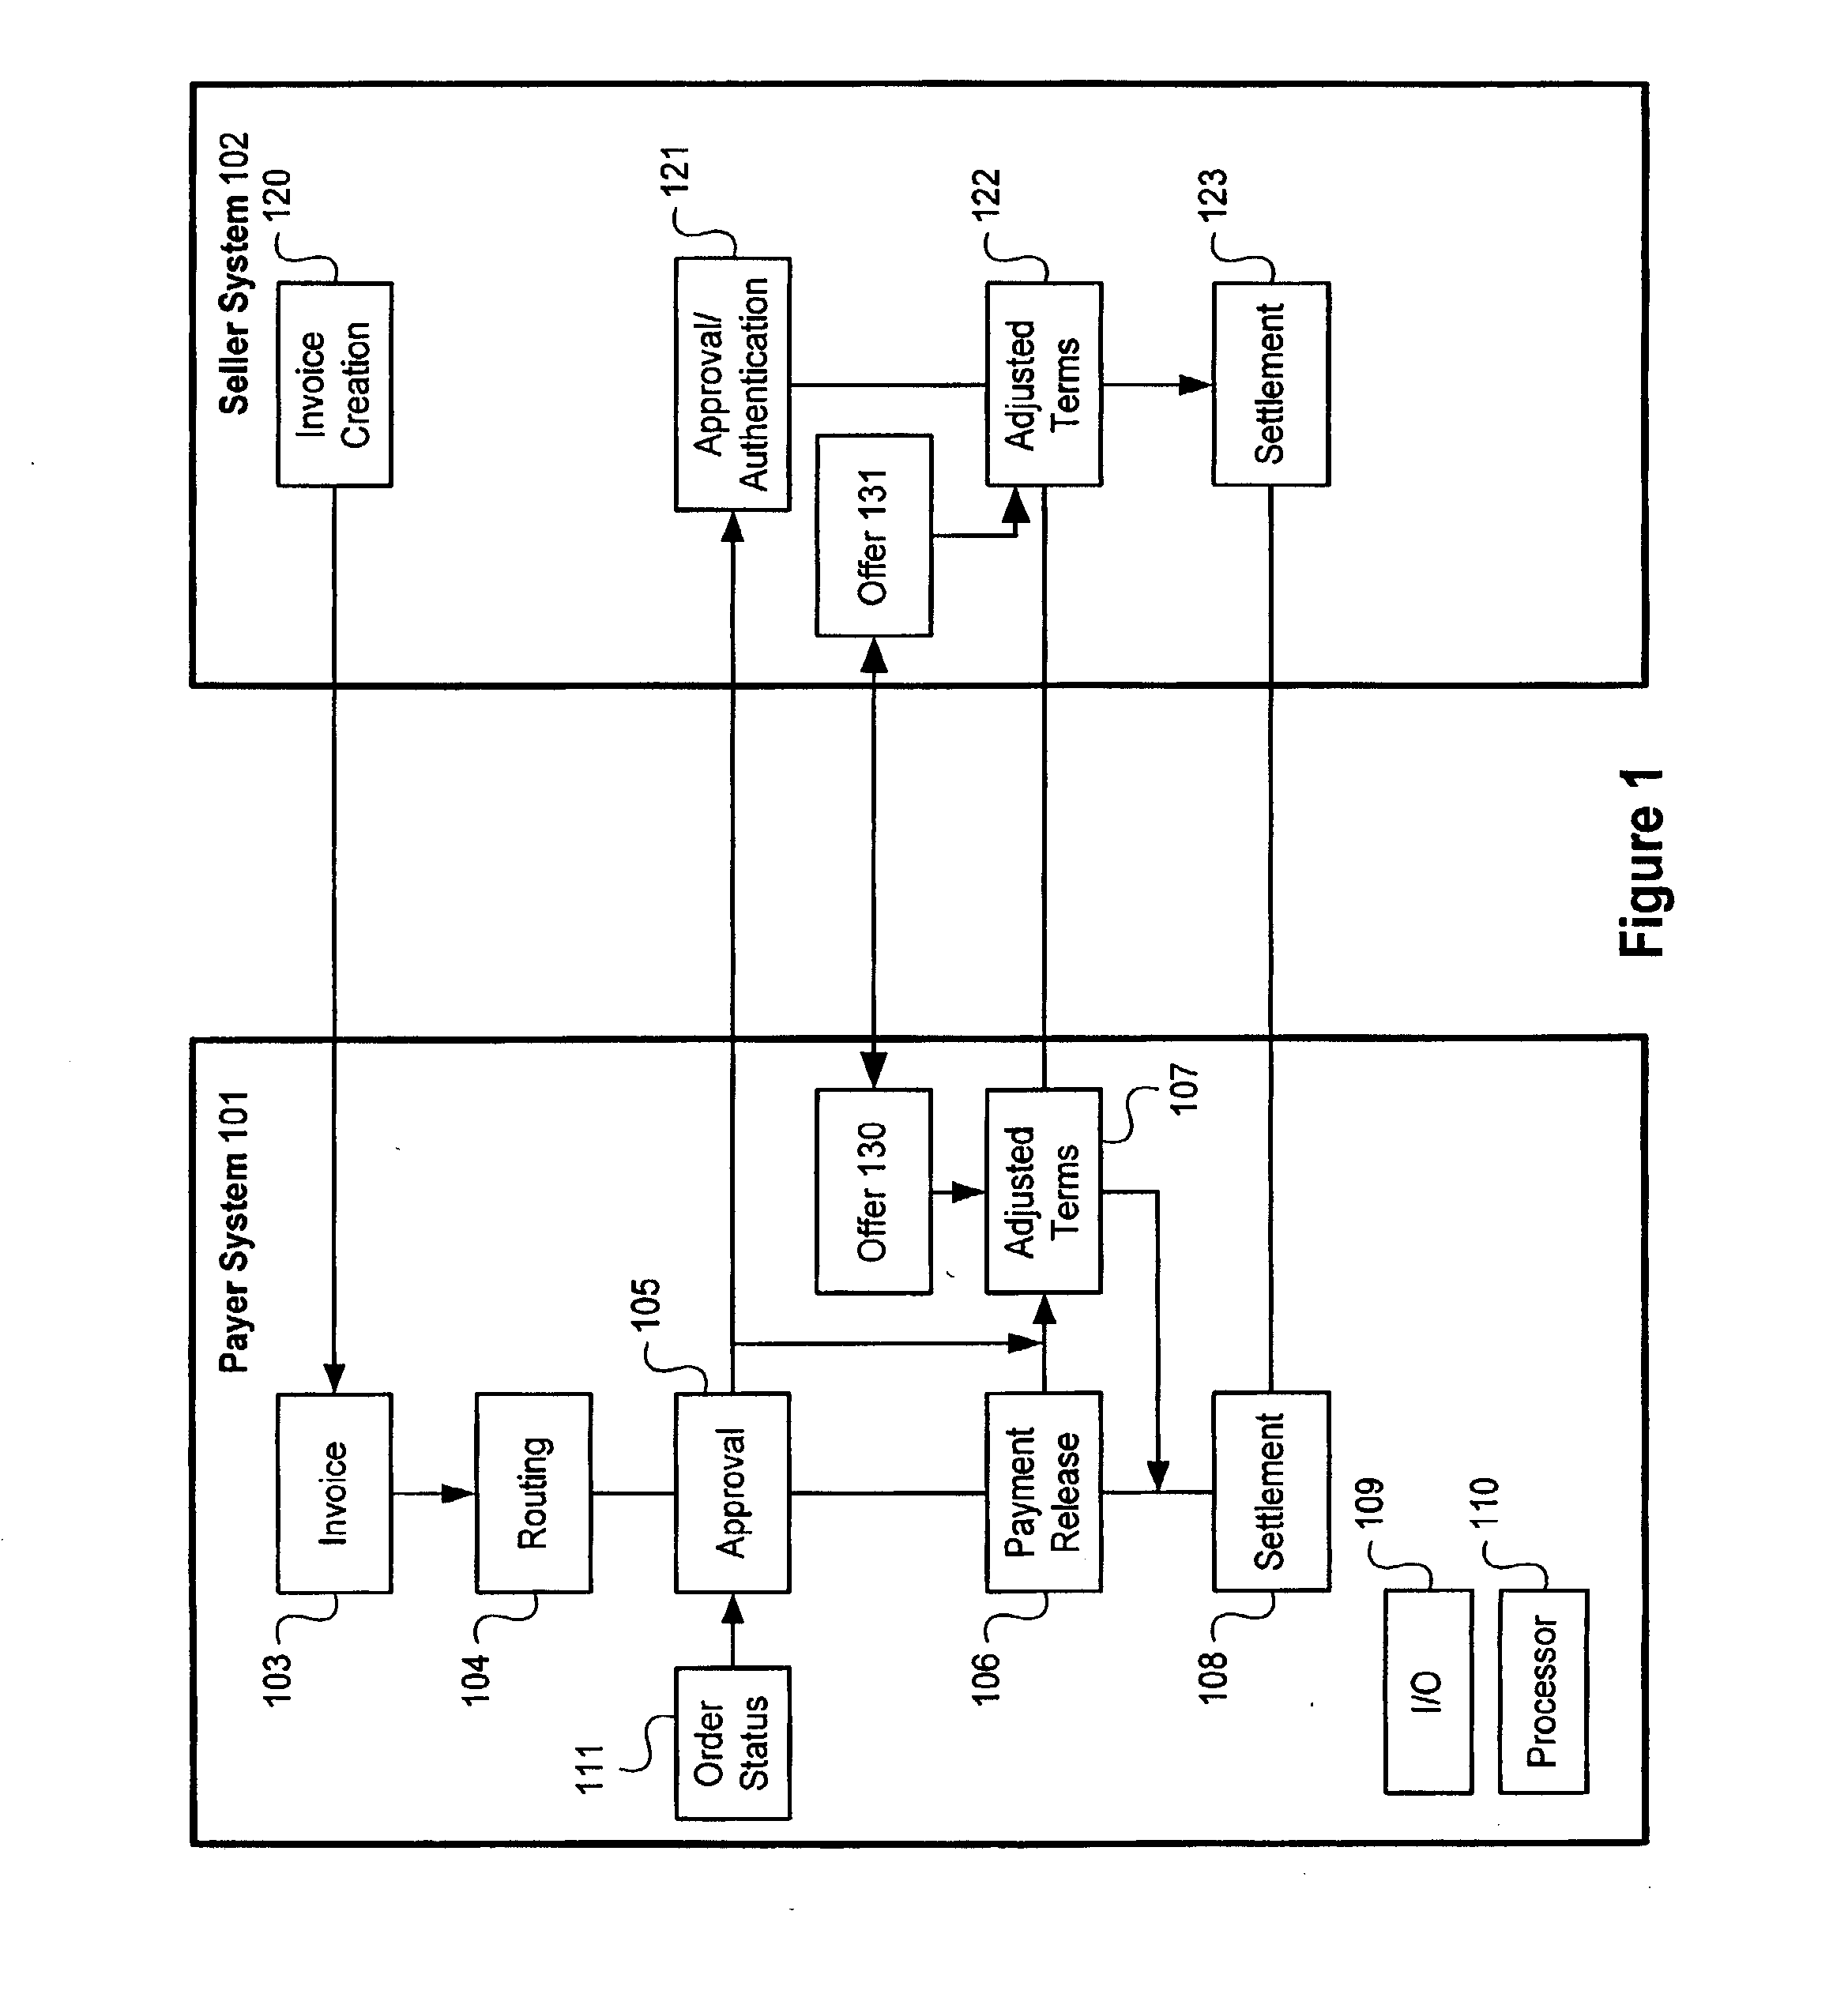 System and method for varying electronic settlements between buyers and suppliers with dynamic discount terms